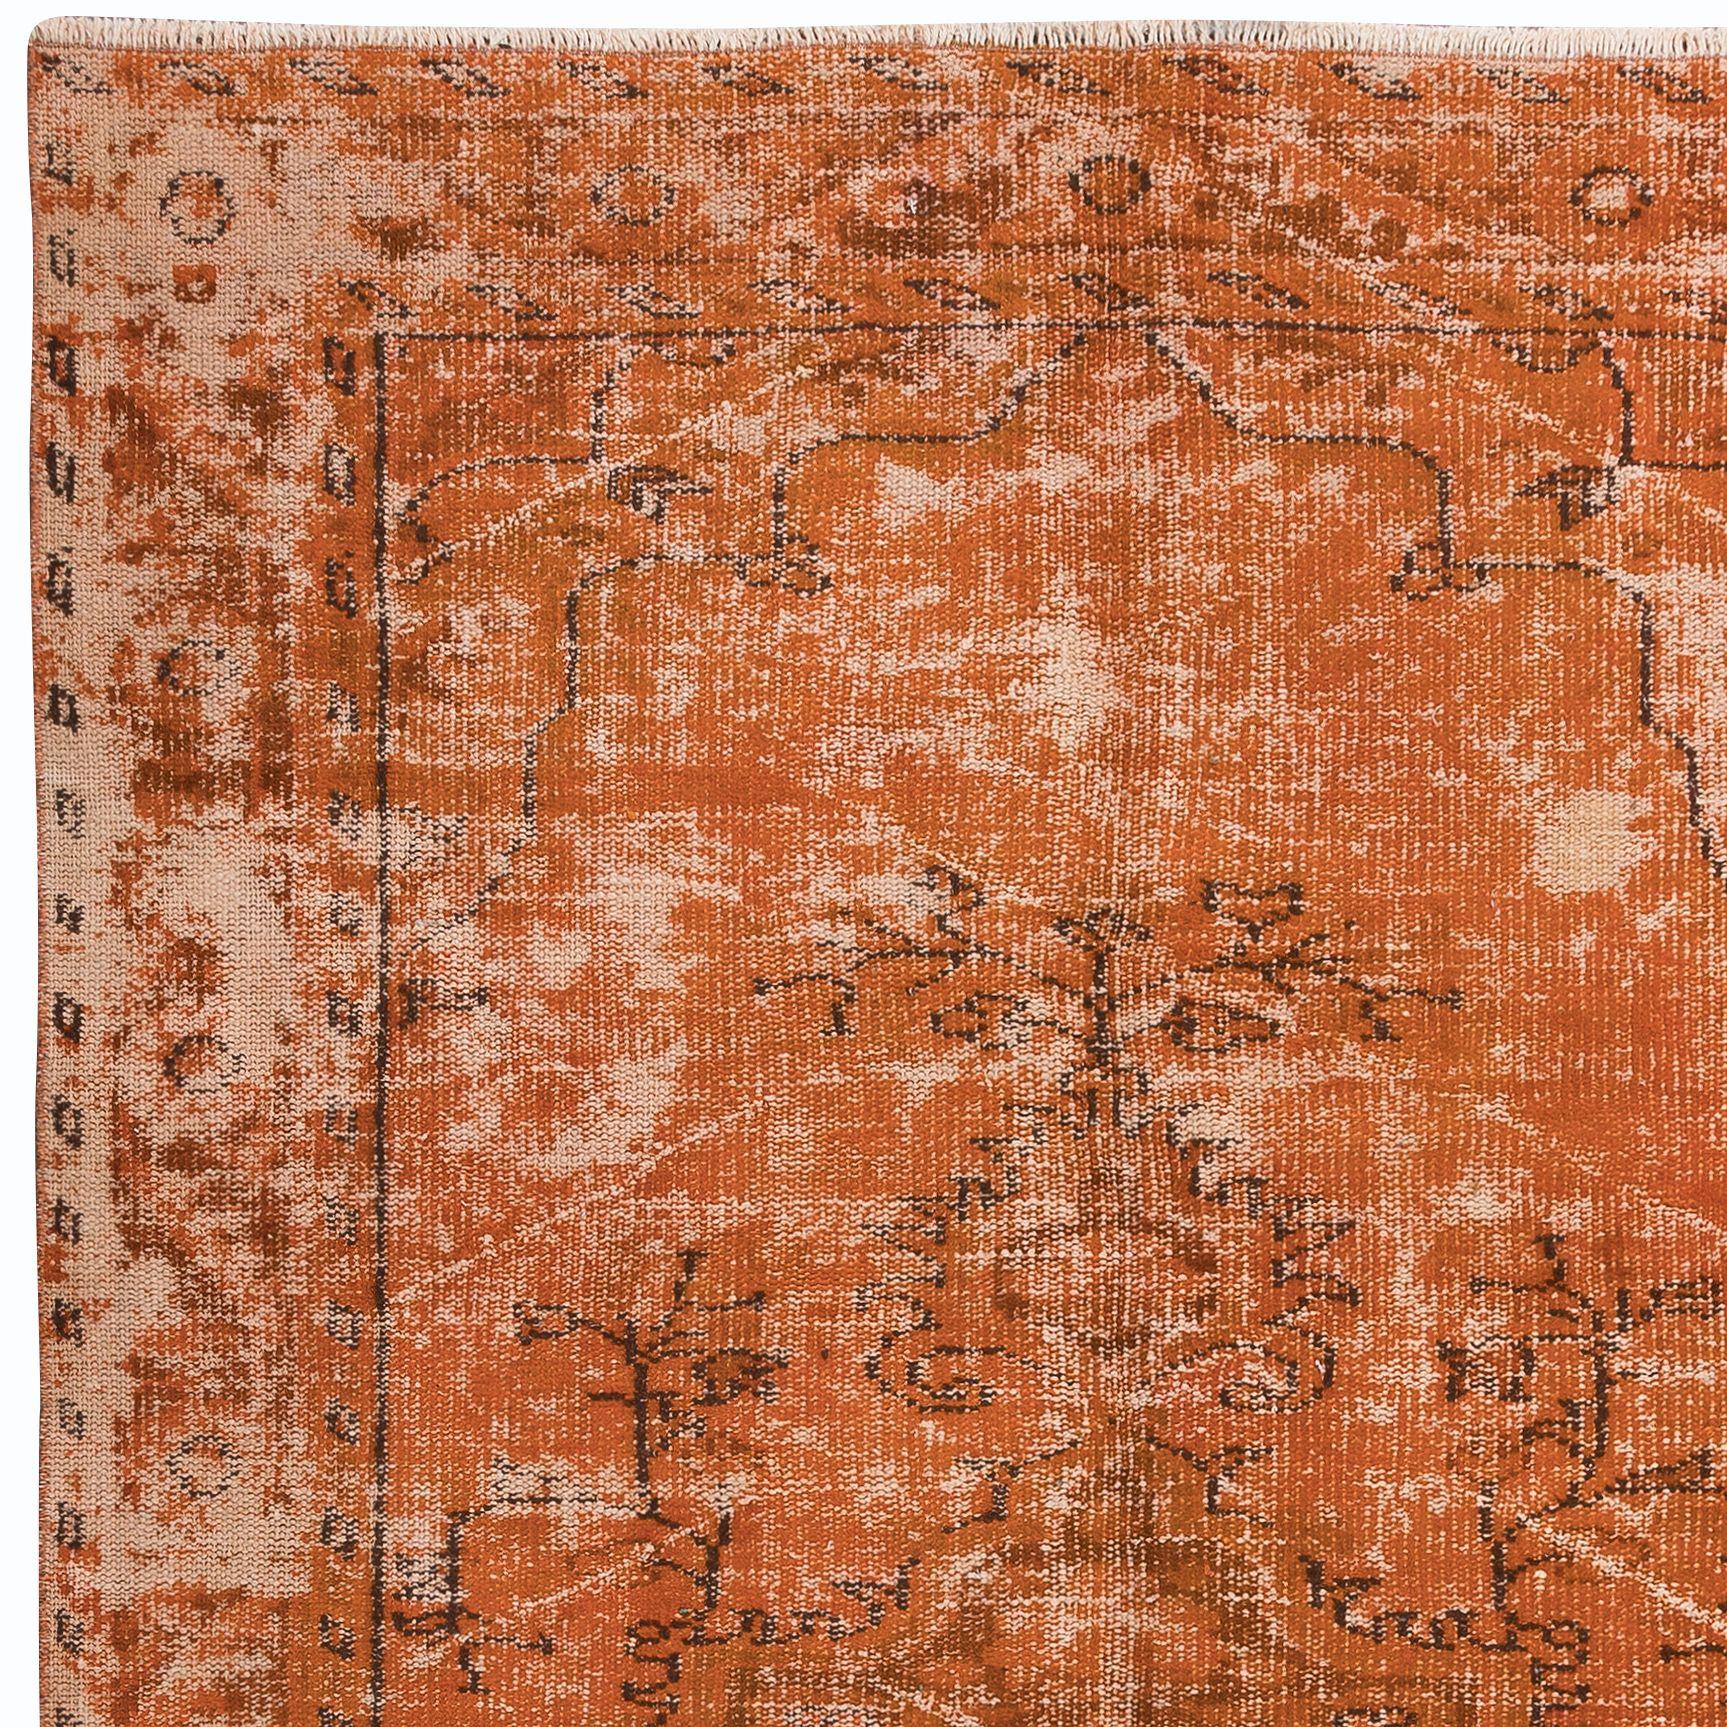 Hand-Woven 5.4x8.4 Ft Handmade Turkish Vintage Rug with Shabby Chic Style in Orange Tones For Sale